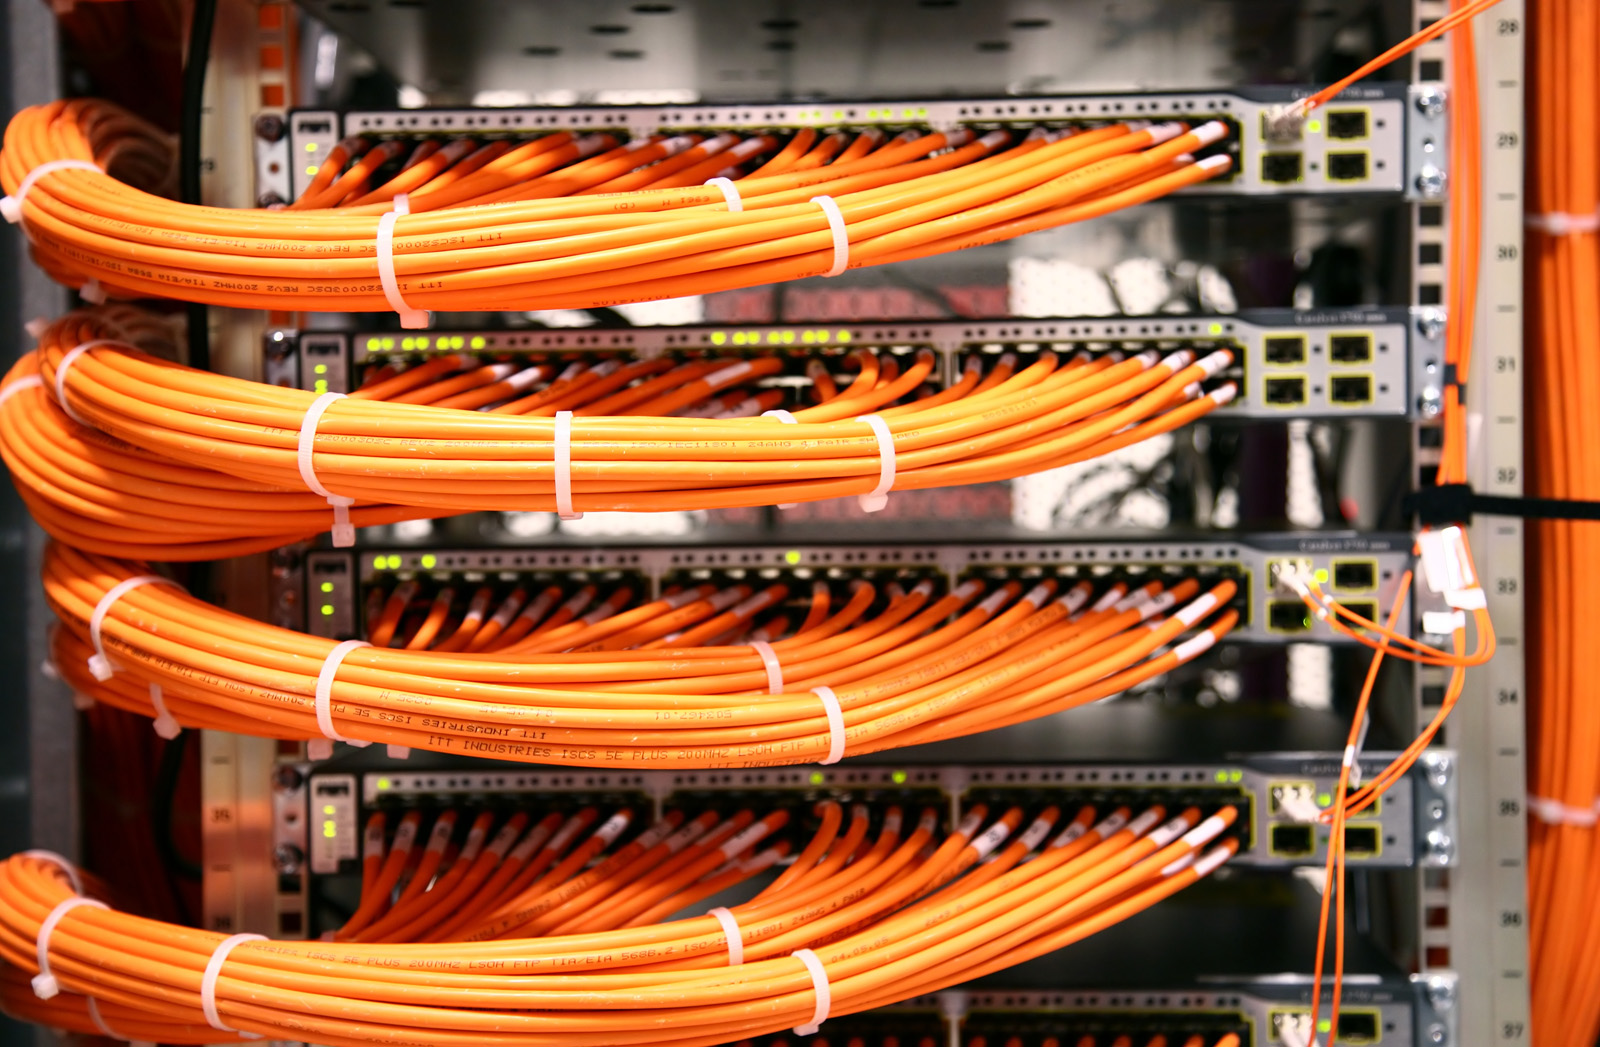 North Lauderdale Florida Superior Voice & Data Network Cabling Services